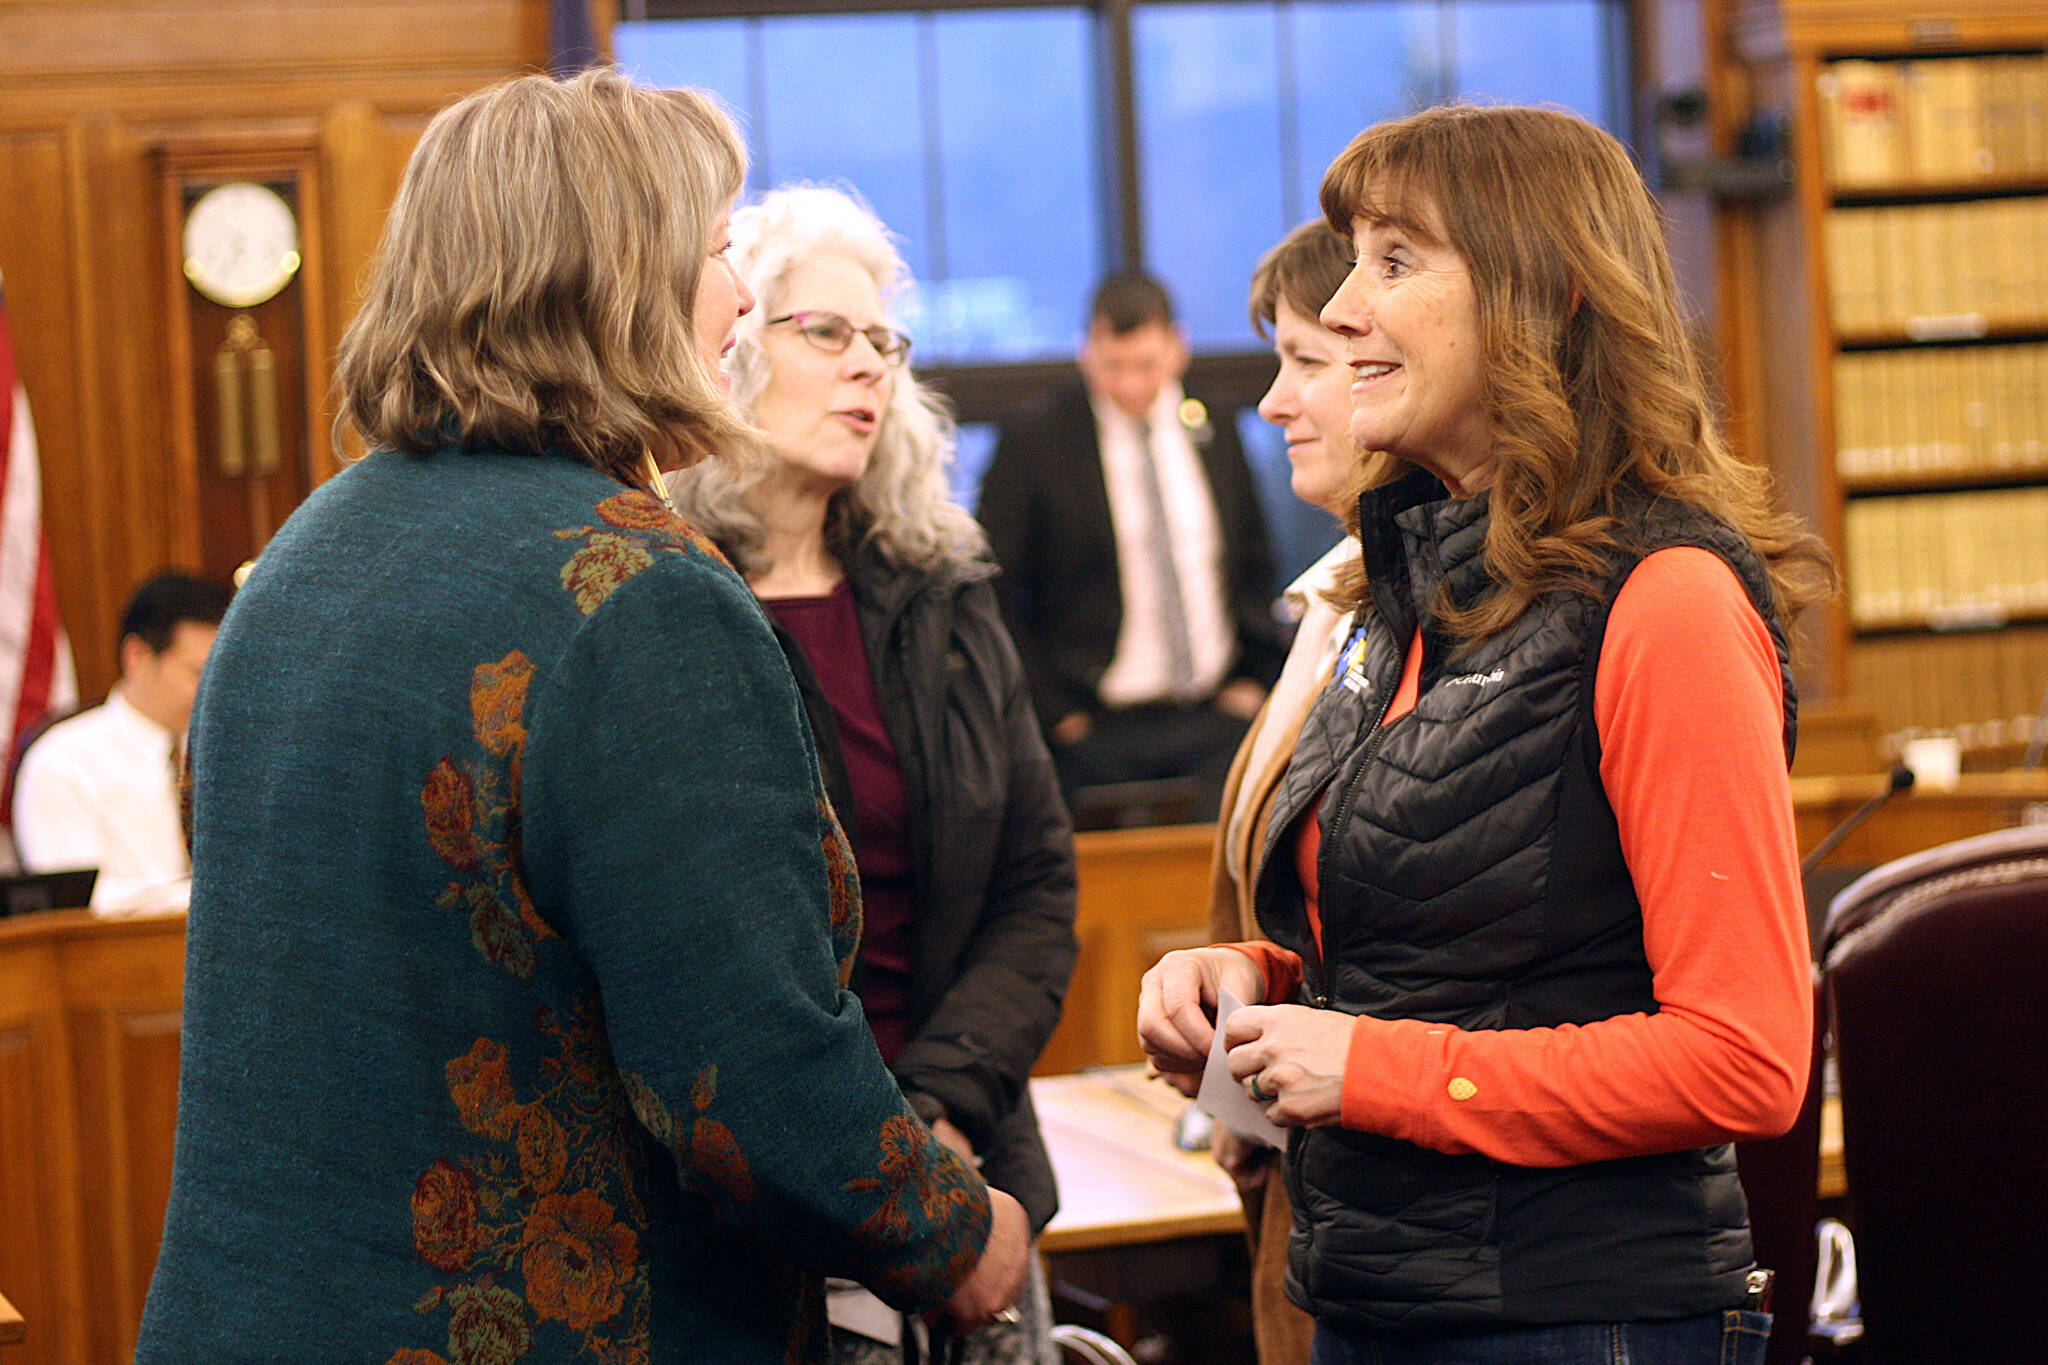 Rep. Sara Hannan, left, a Juneau Democrat on the House Finance Committee, and Juneau School District Superintendent Bridget Weiss talk during a break in a committee hearing Tuesday night featuring testimony from local residents about next year’s proposed state budget. (Mark Sabbatini / Juneau Empire)